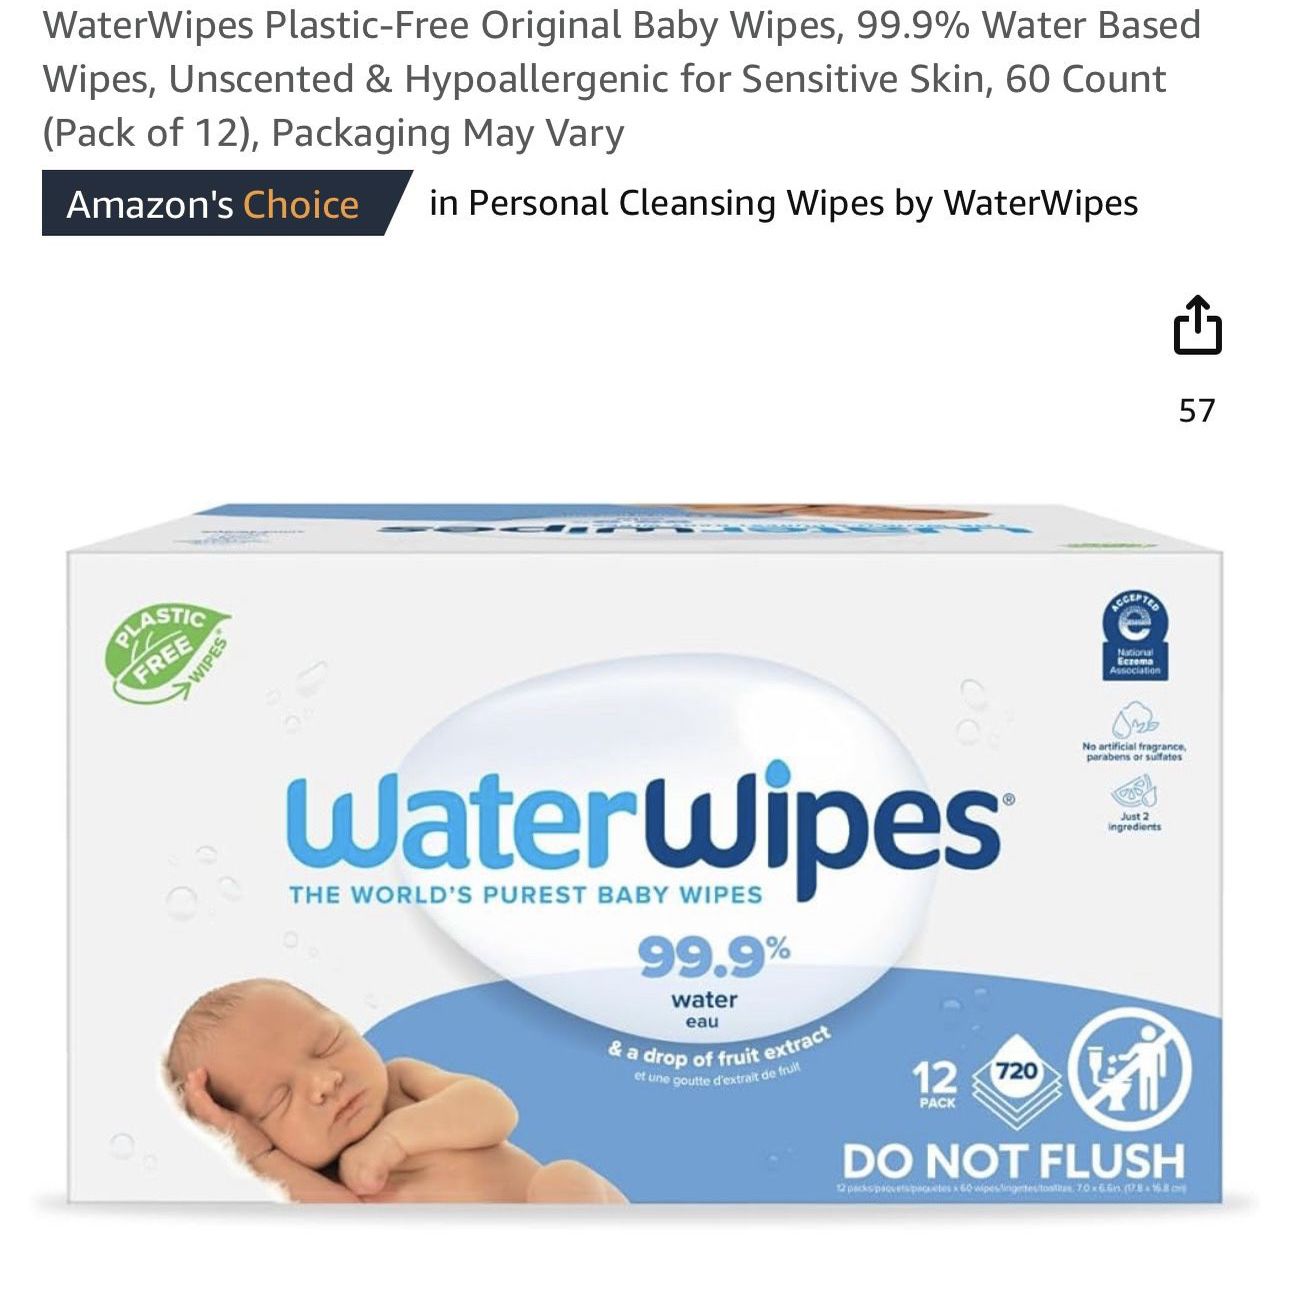 WaterWipes Plastic-Free Original Baby Wipes, 99.9% Water Based Wipes, Unscented & Hypoallergenic for Sensitive Skin, 60 Count (Pack of 12), Packaging 